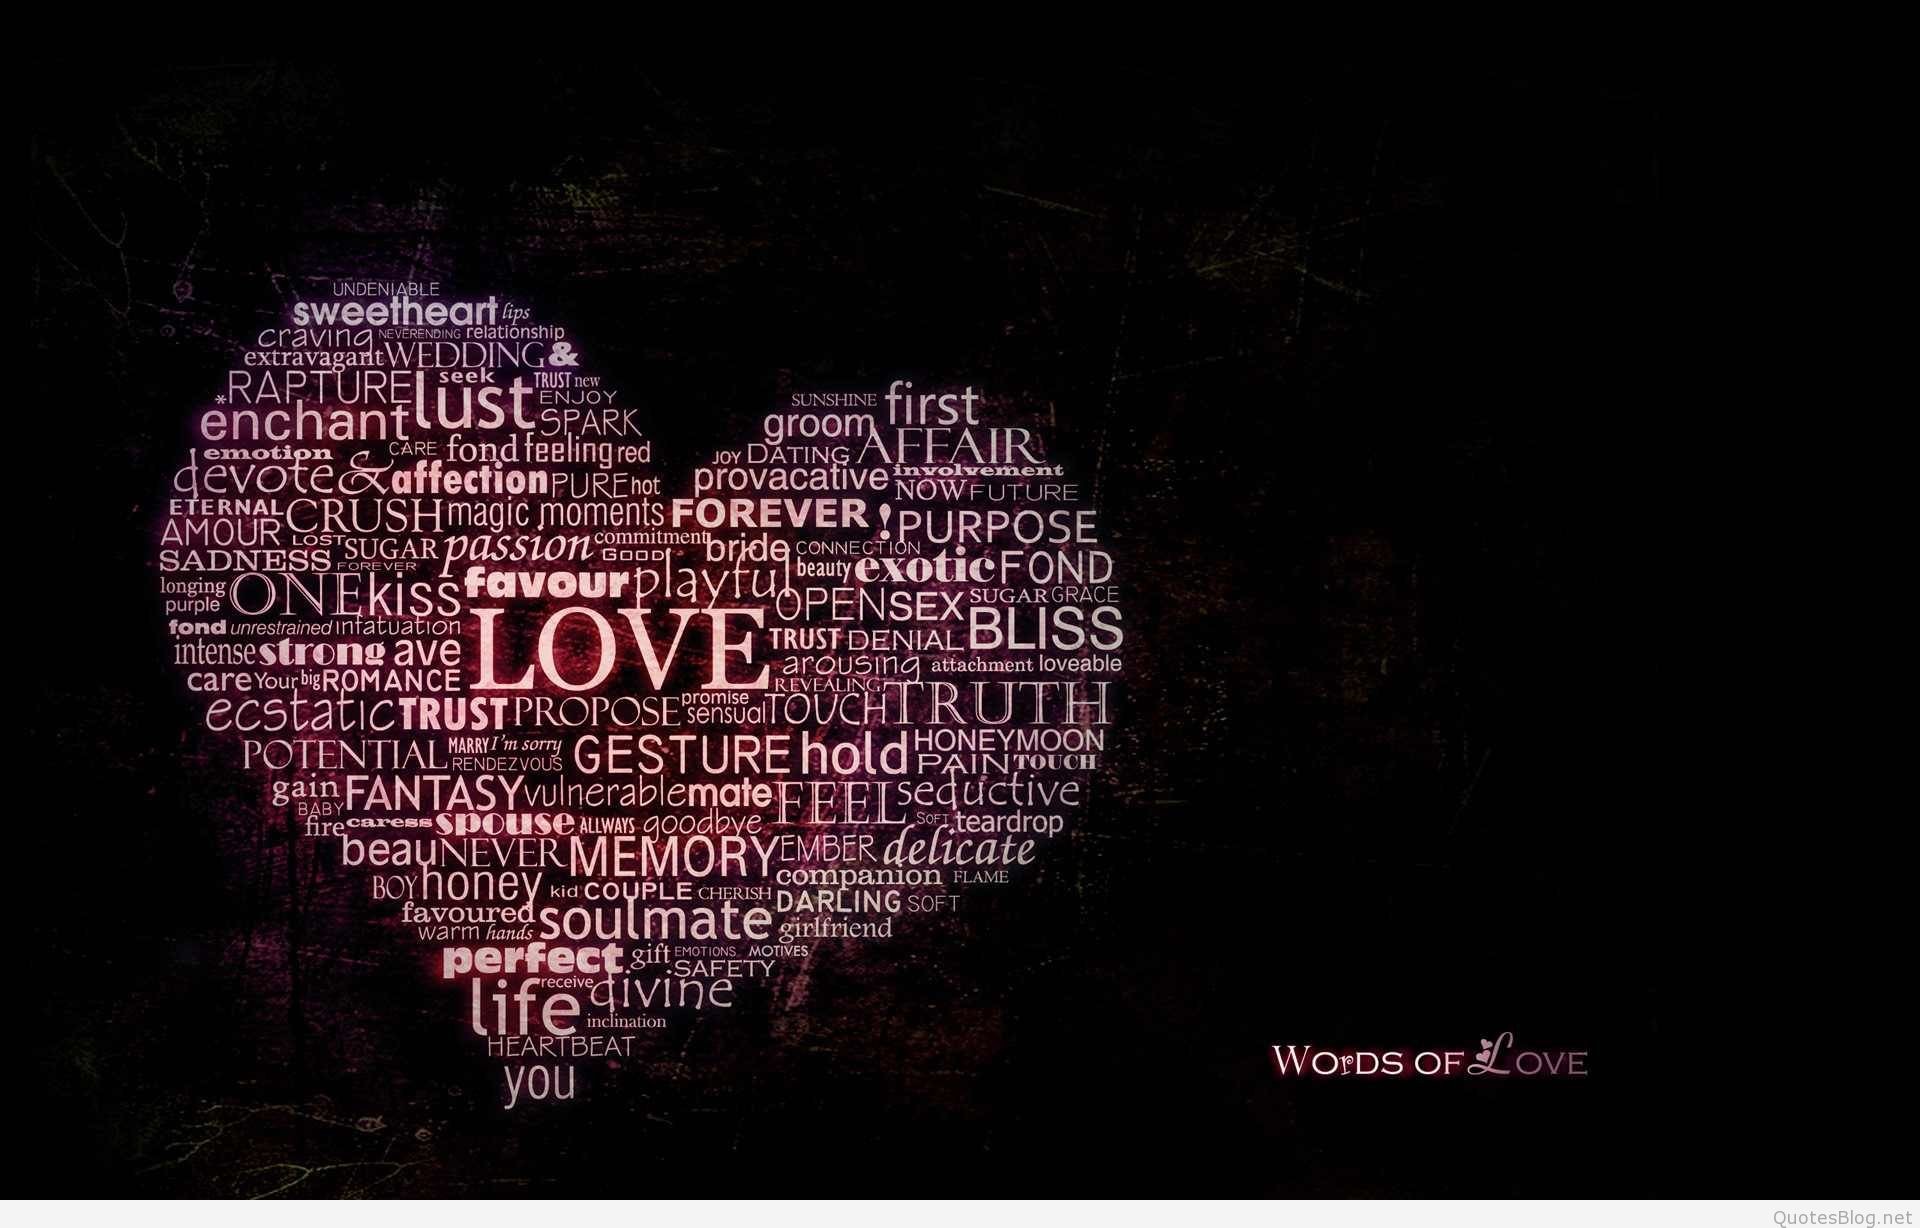 Love quotes with black background Wallpapers6